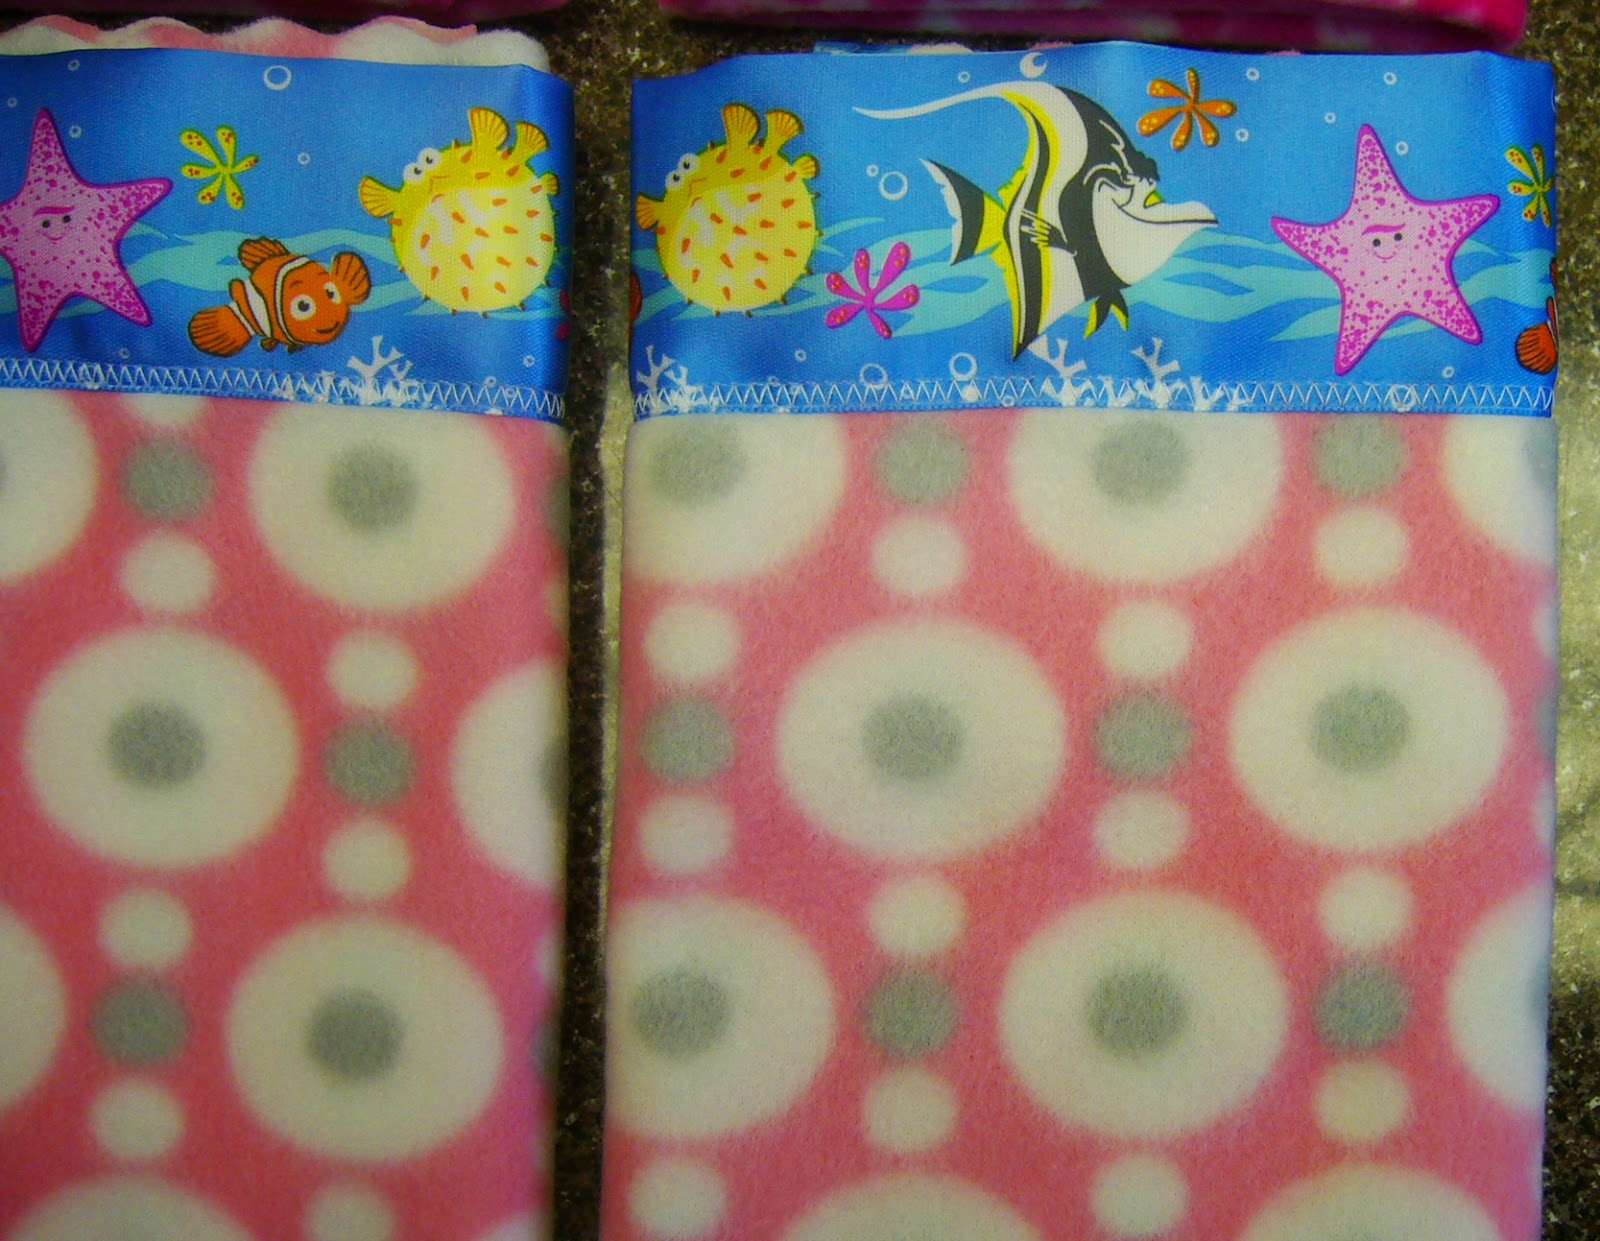 Simply Shoeboxes: Satin Blanket Binding on Bitty Blankets for OCC Shoeboxes